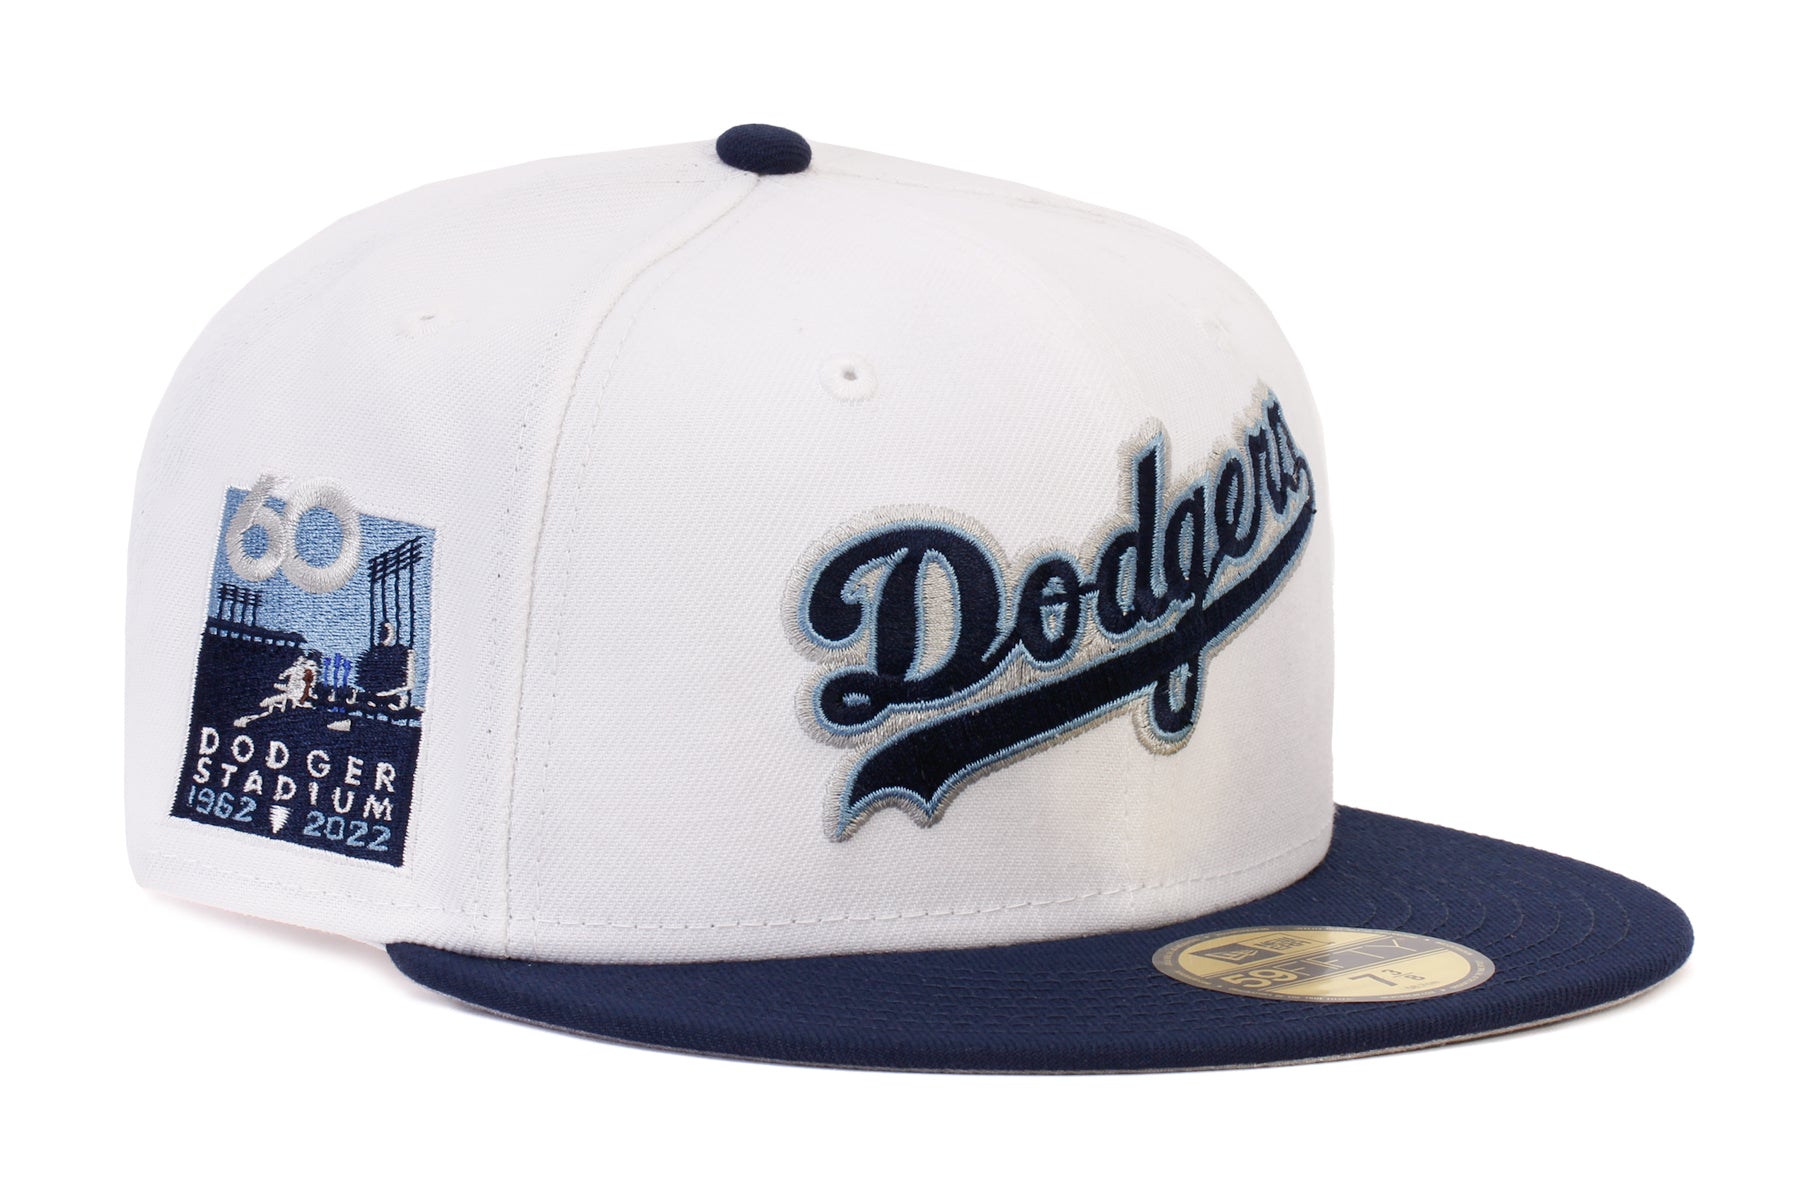 OFFICIAL 2022 Los Angeles Dodgers Dodger Stadium 60th 